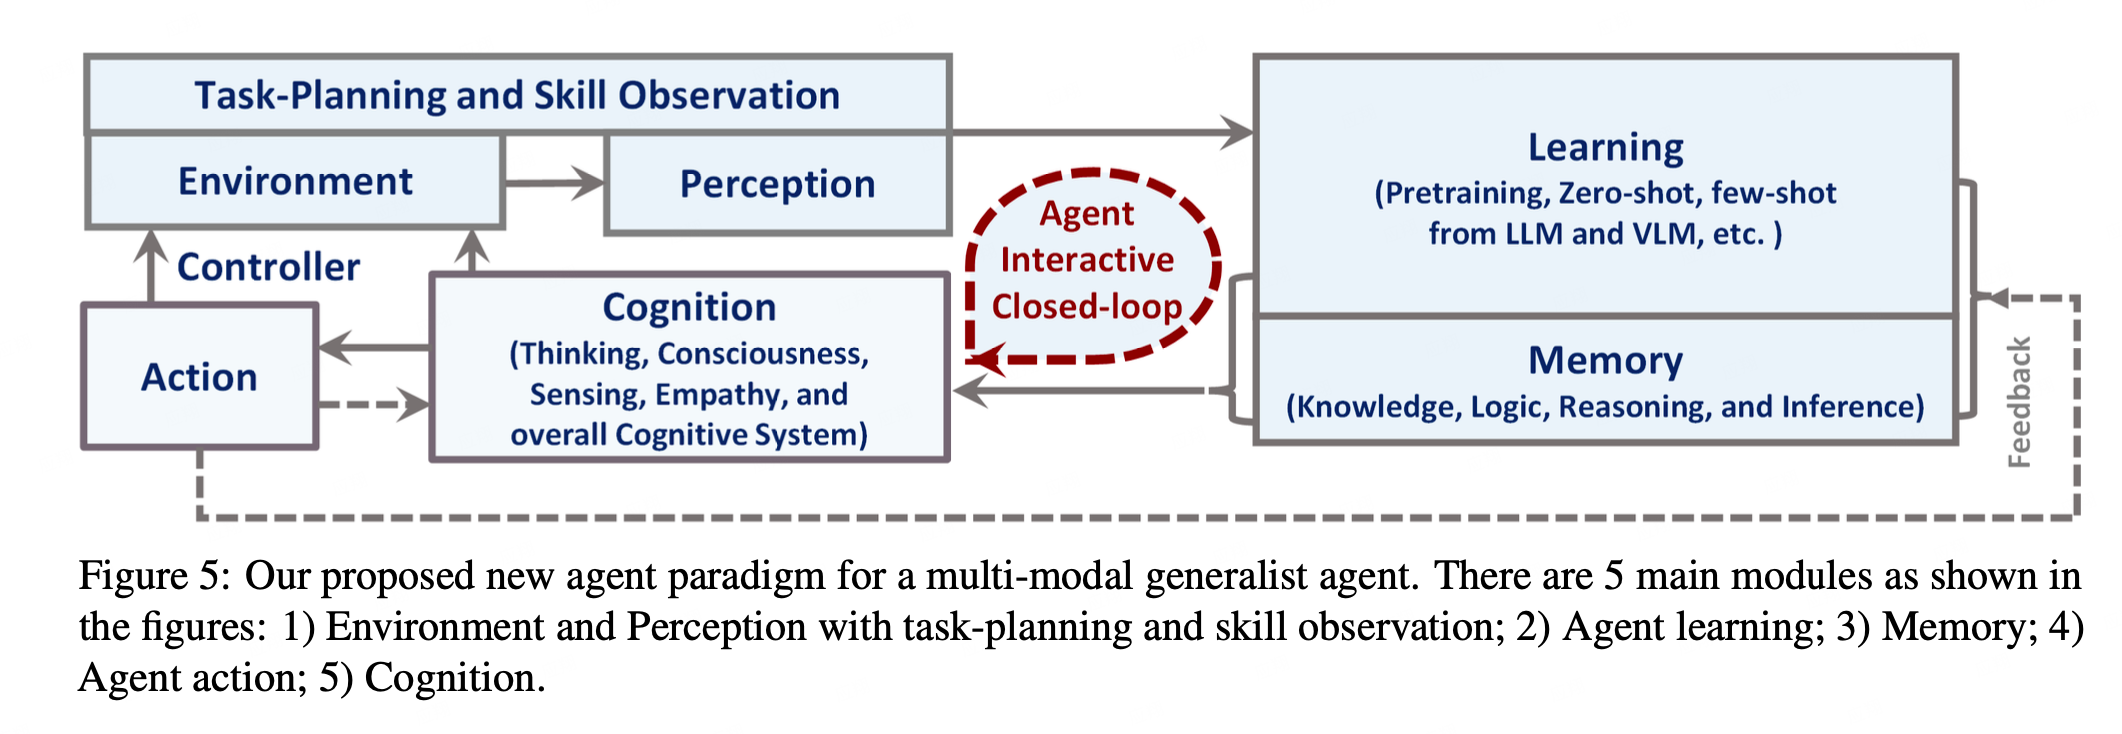 new agent paradigm for a multi-modal generalist agent.